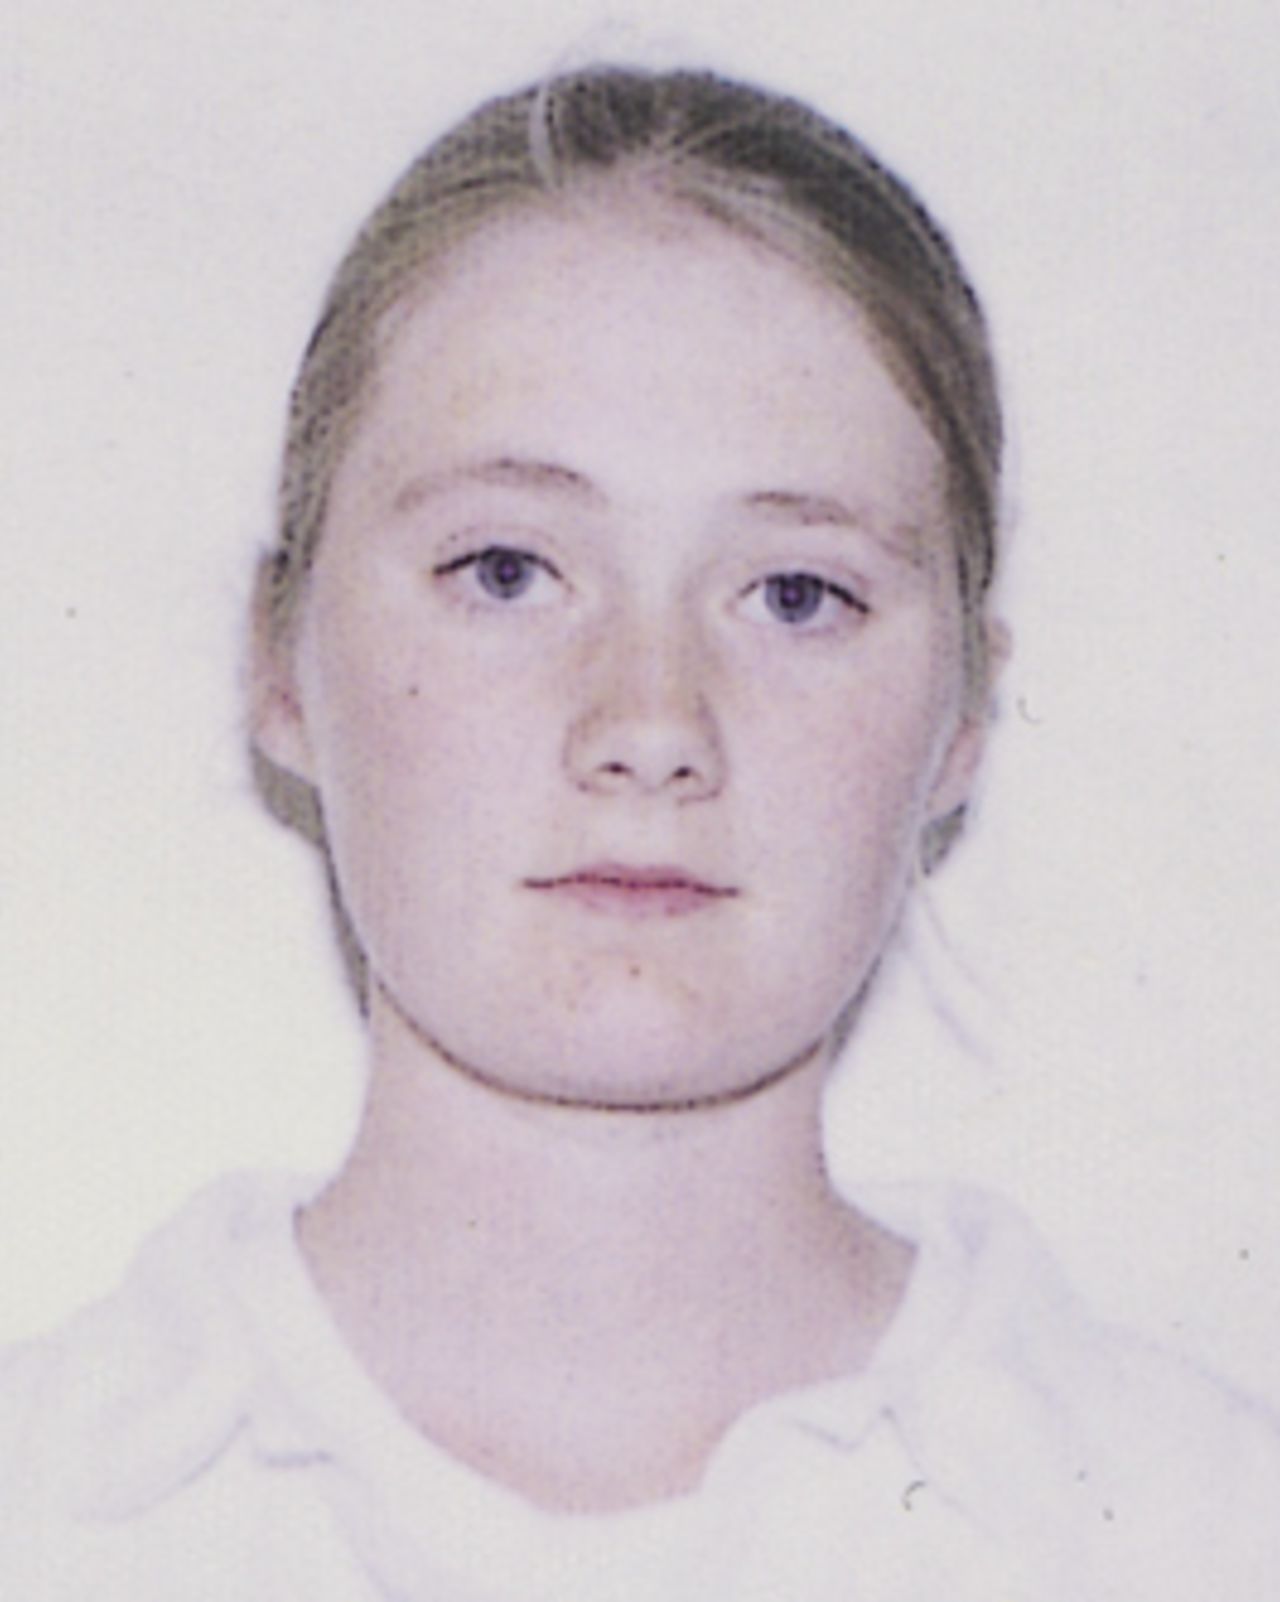 Portrait of Aoife Budd - Ireland reserve player for the CricInfo Women's World Cup 2000